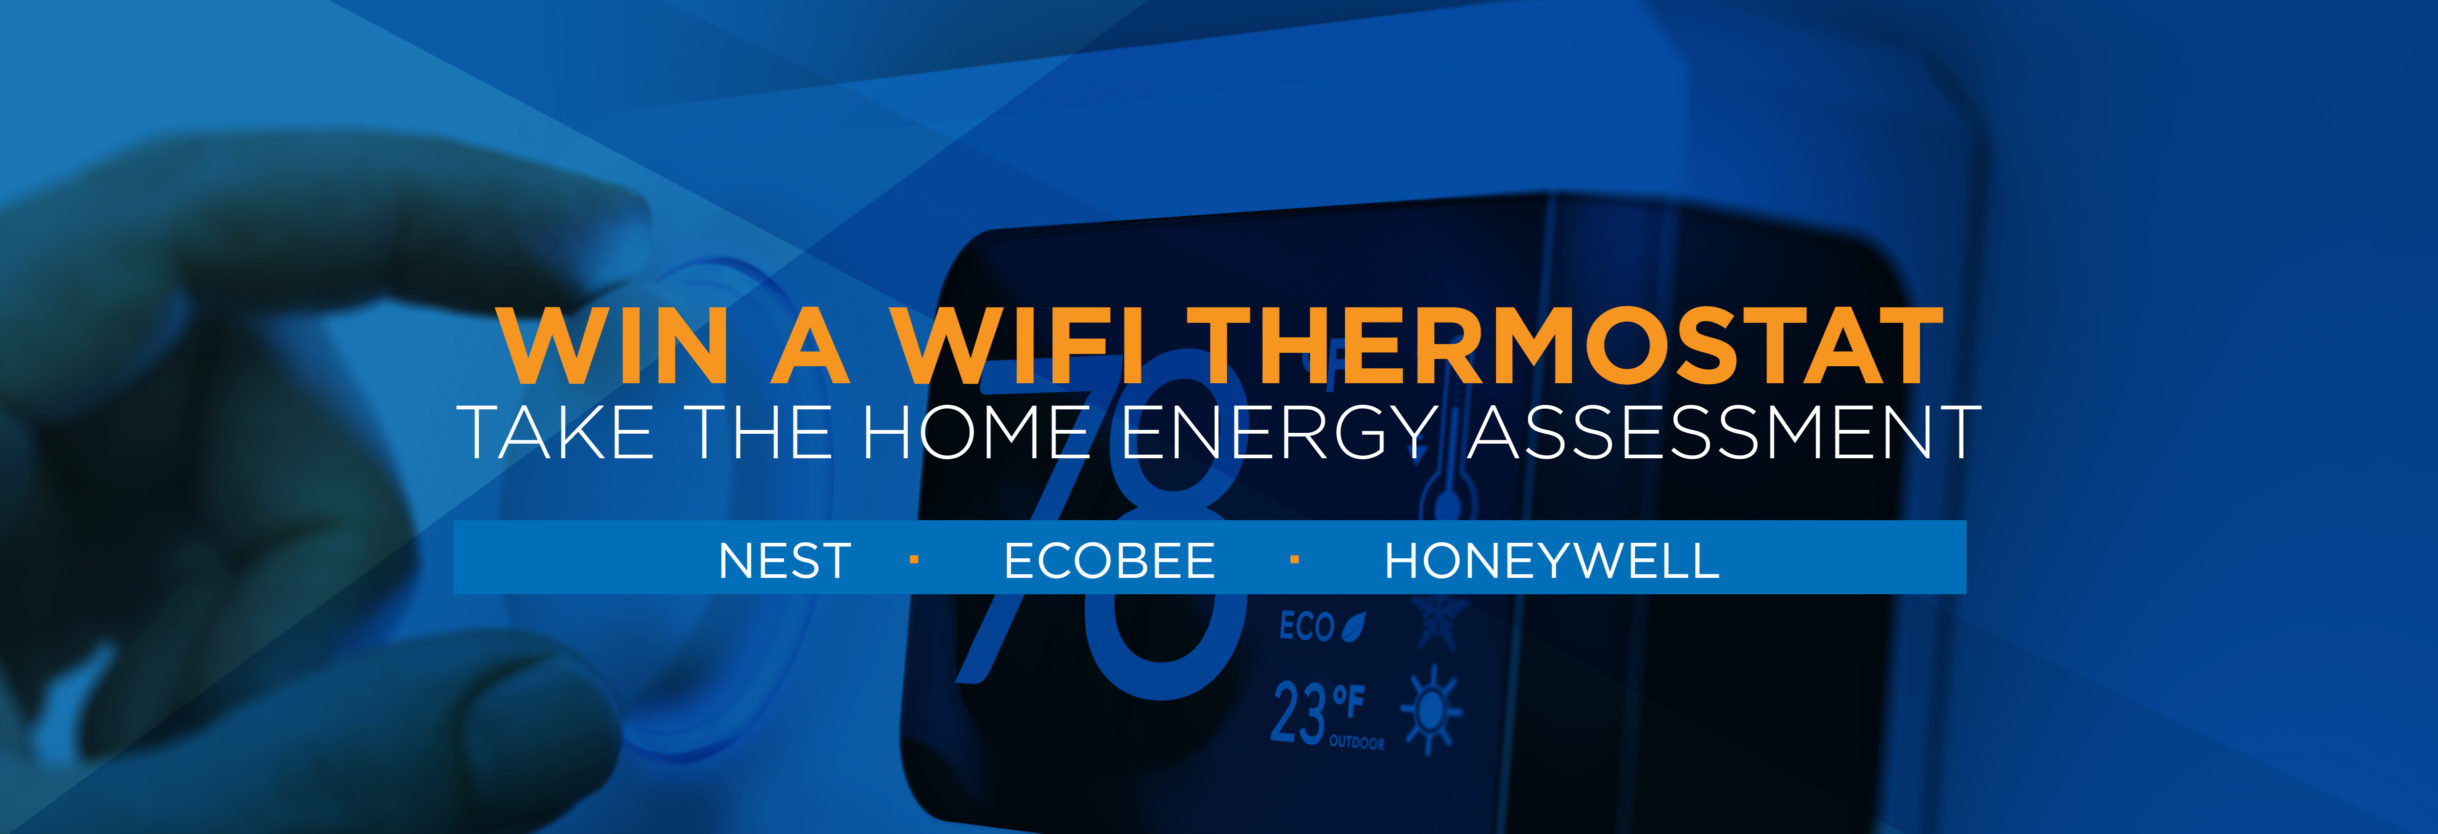 Win a WiFi Thermostat - Take the Home Energy Assessment